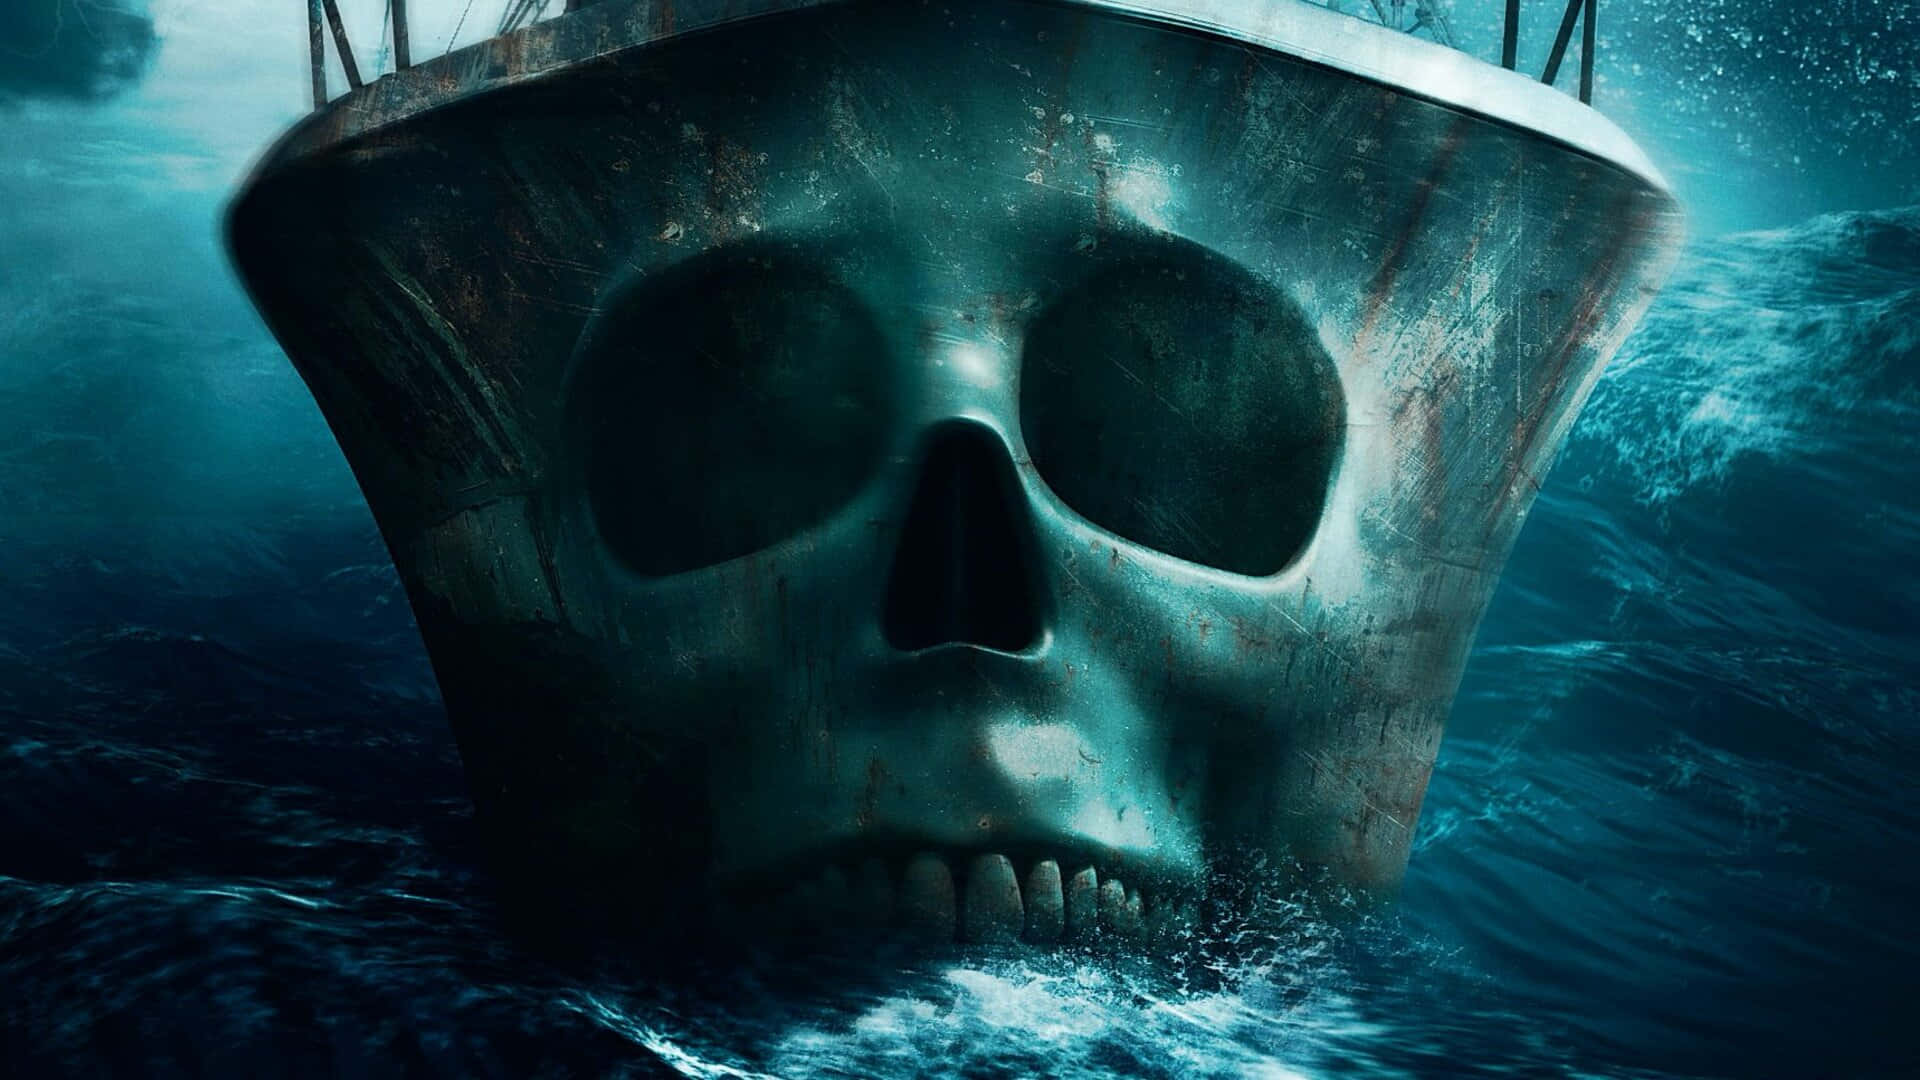 Scary Ocean Skull Ship Picture 1920 x 1080 Picture